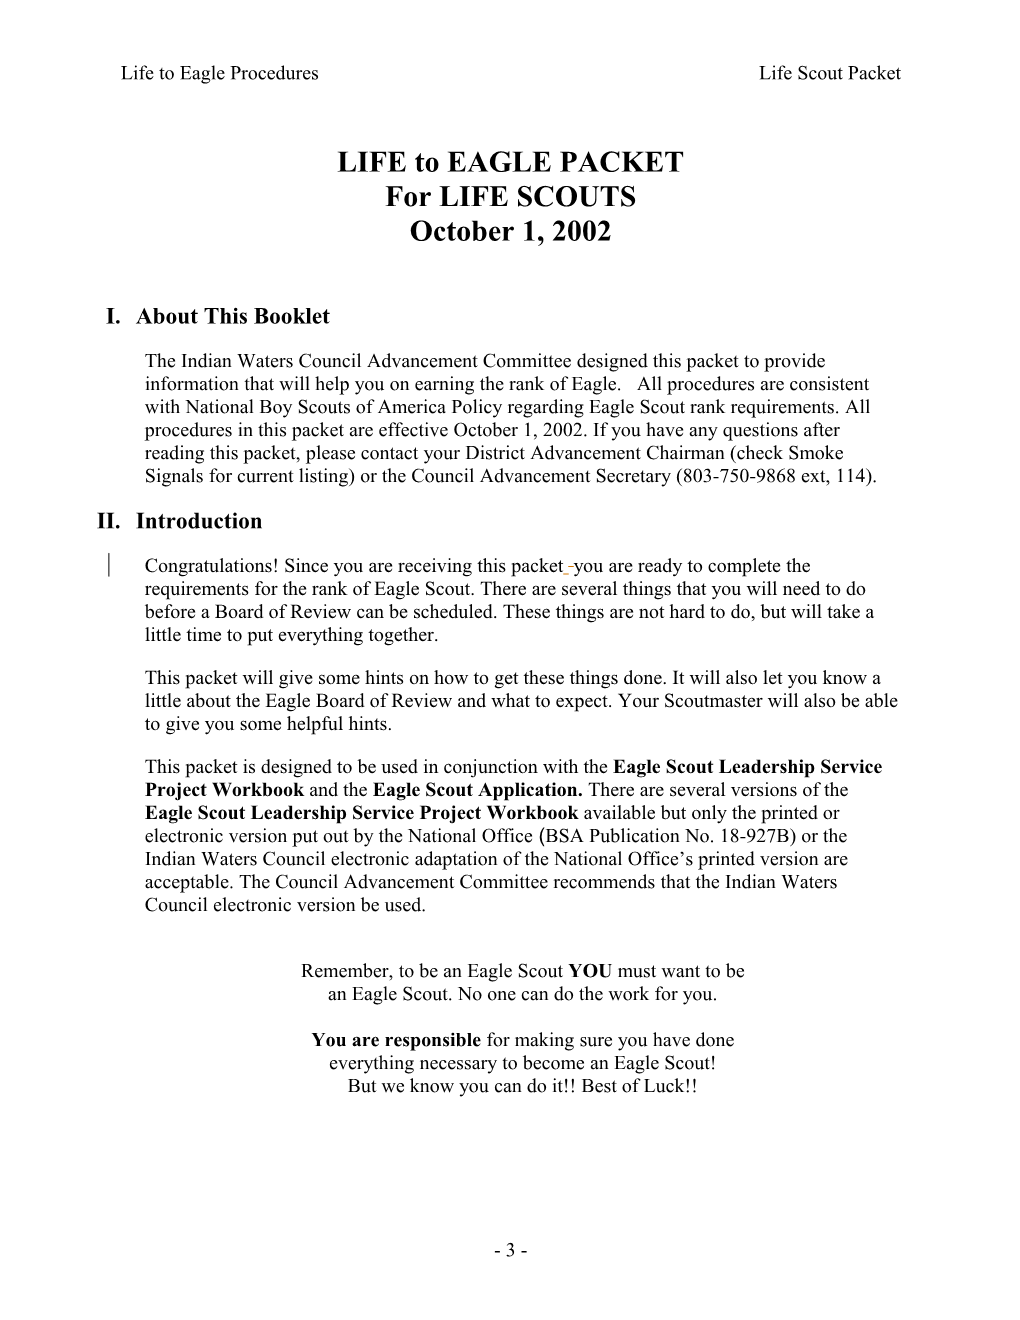 Life to Eagle Procedures, Life Scout Packet